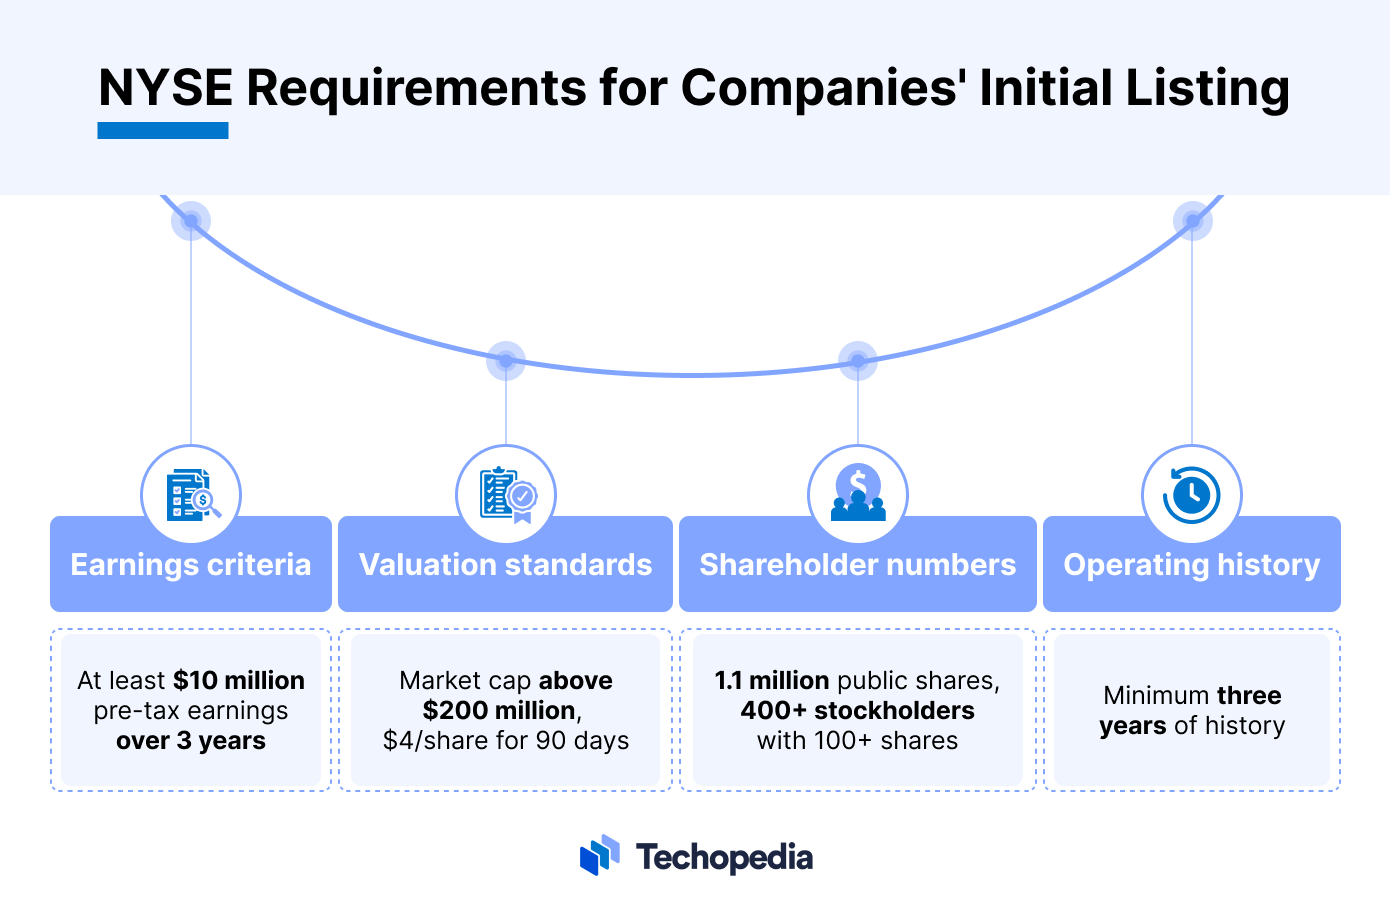 NYSE Requirements for Companies' Initial Listing